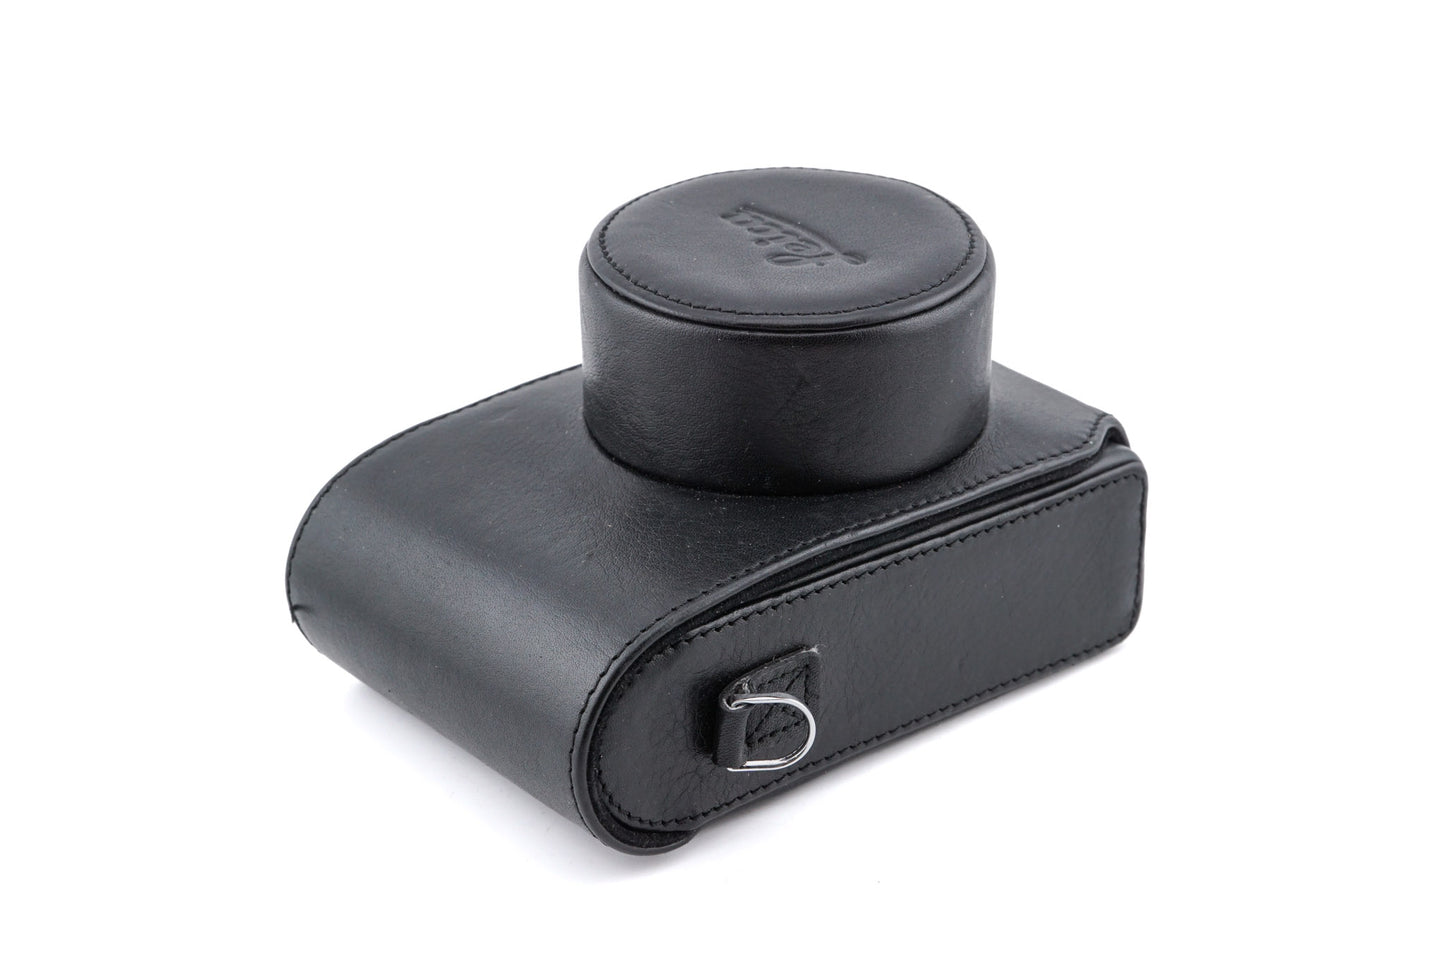 Leica D-Lux 7 Leather Case